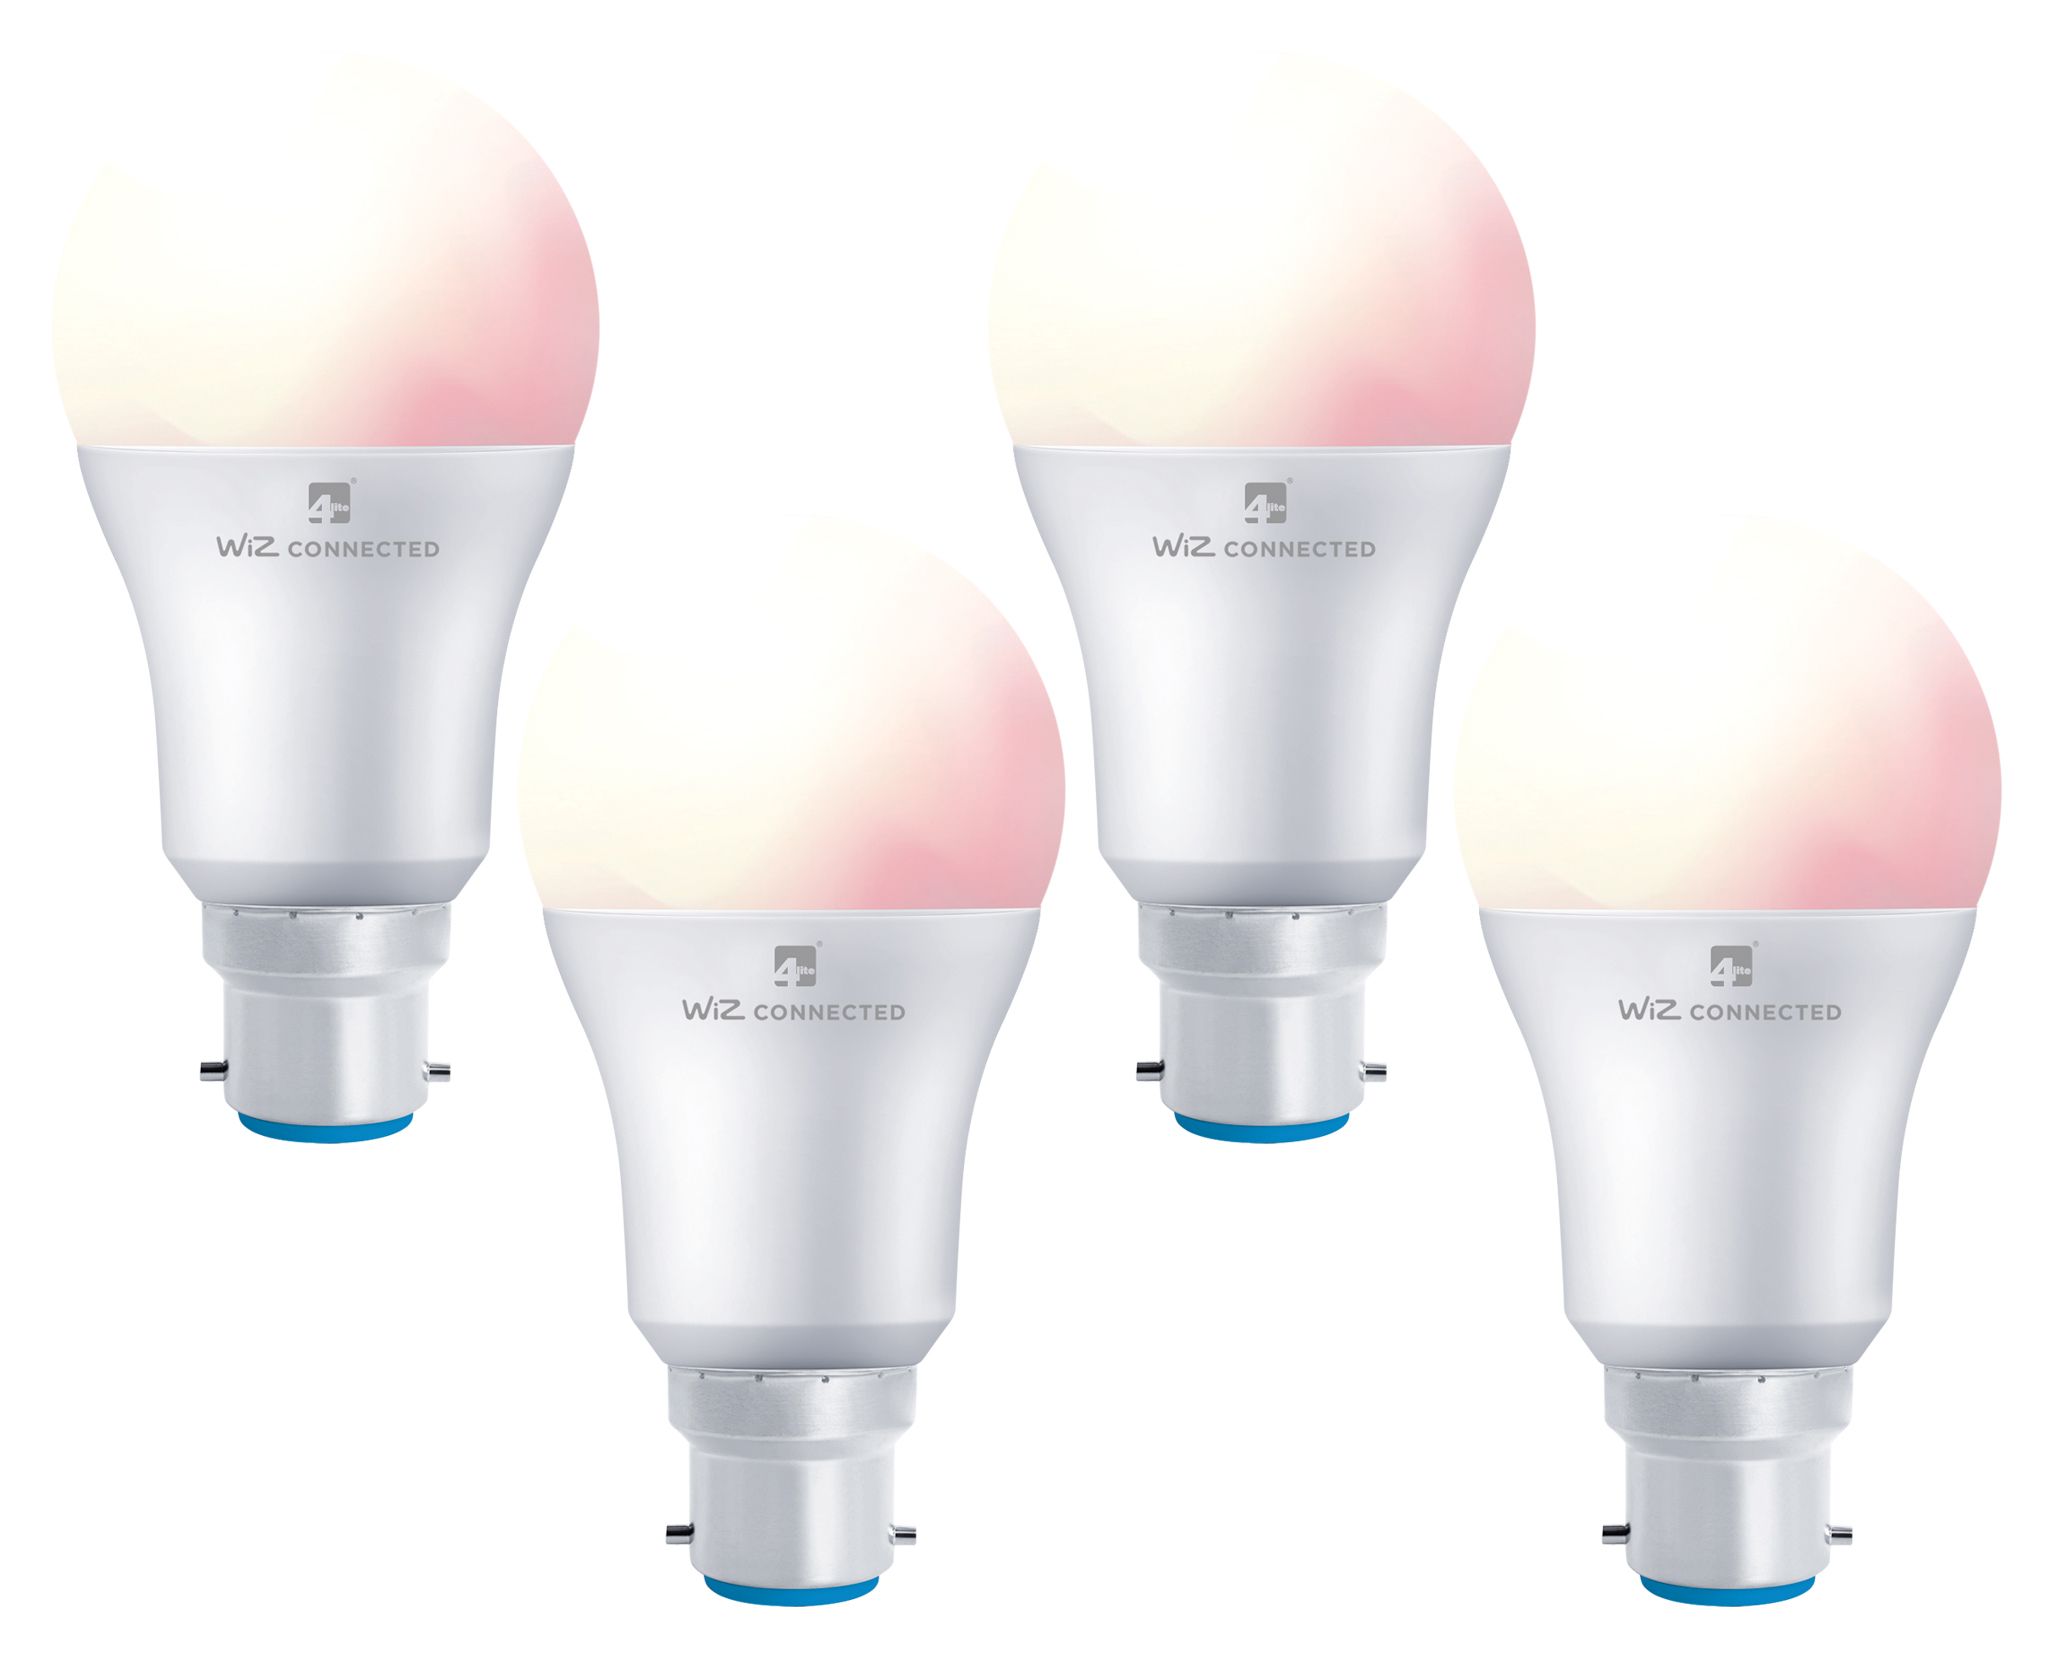 Image of 4lite WiZ Connected LED SMART B22 Light Bulbs - White & Colour - Pack of 4